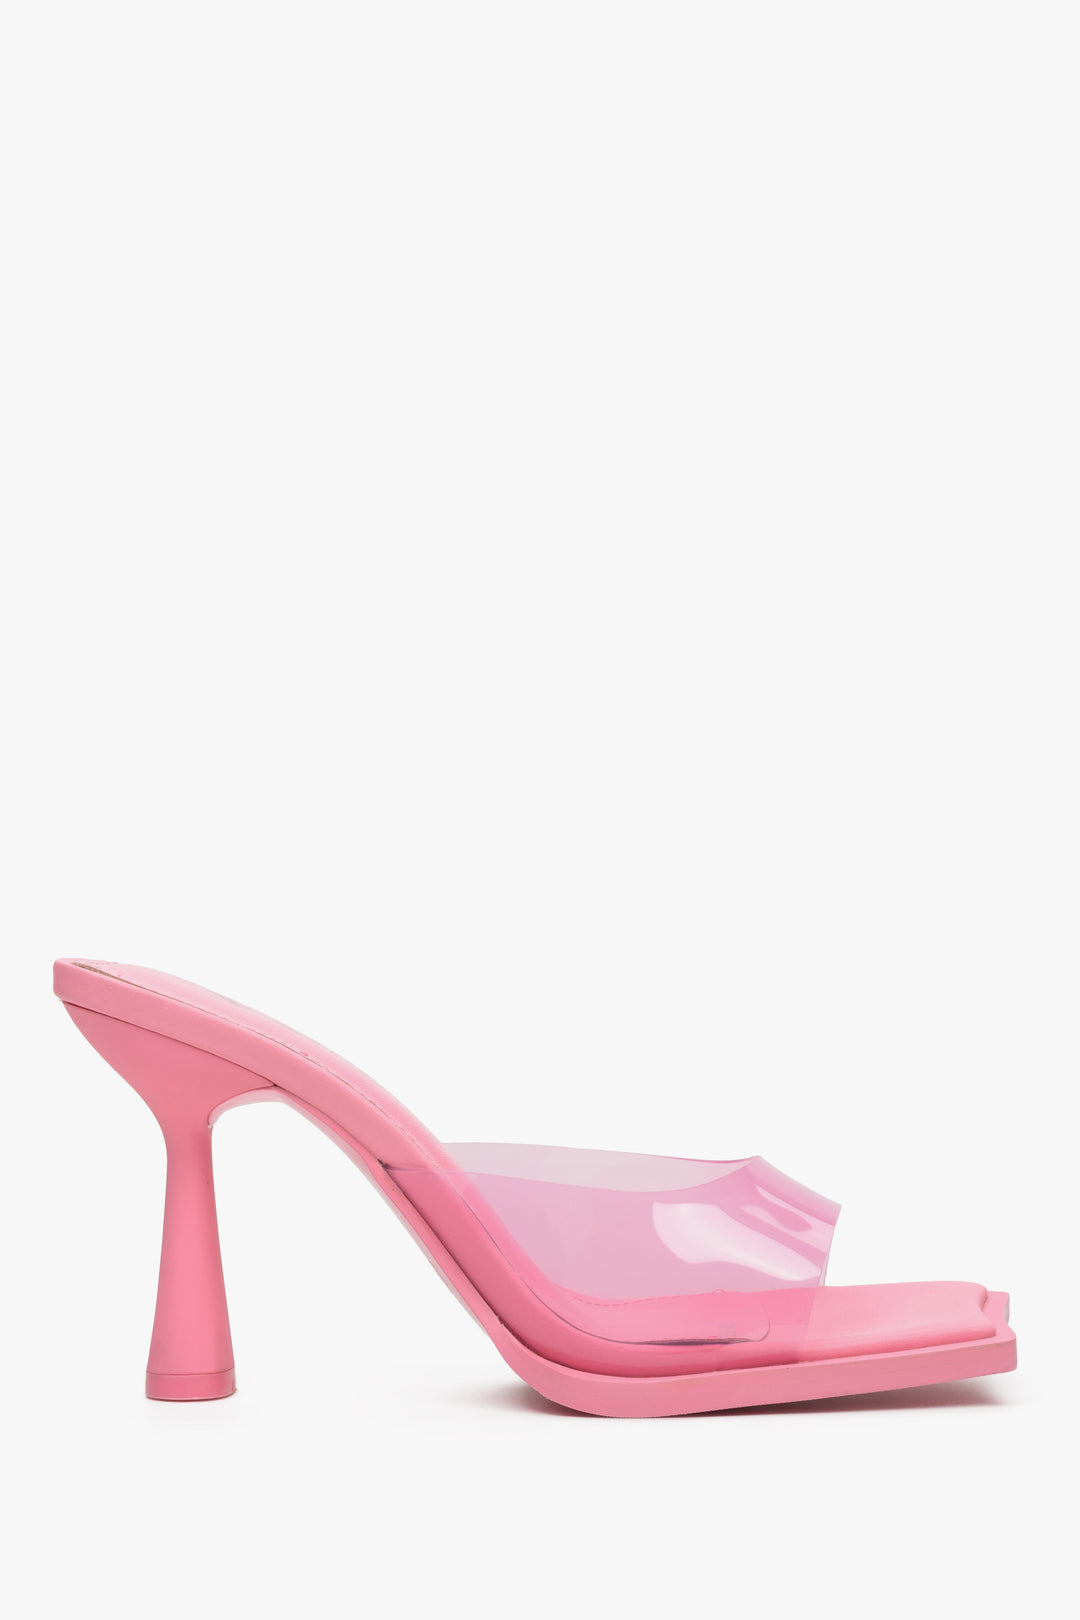 Women's High Heeled Sandals with a Pink Sole Estro ER00113334.